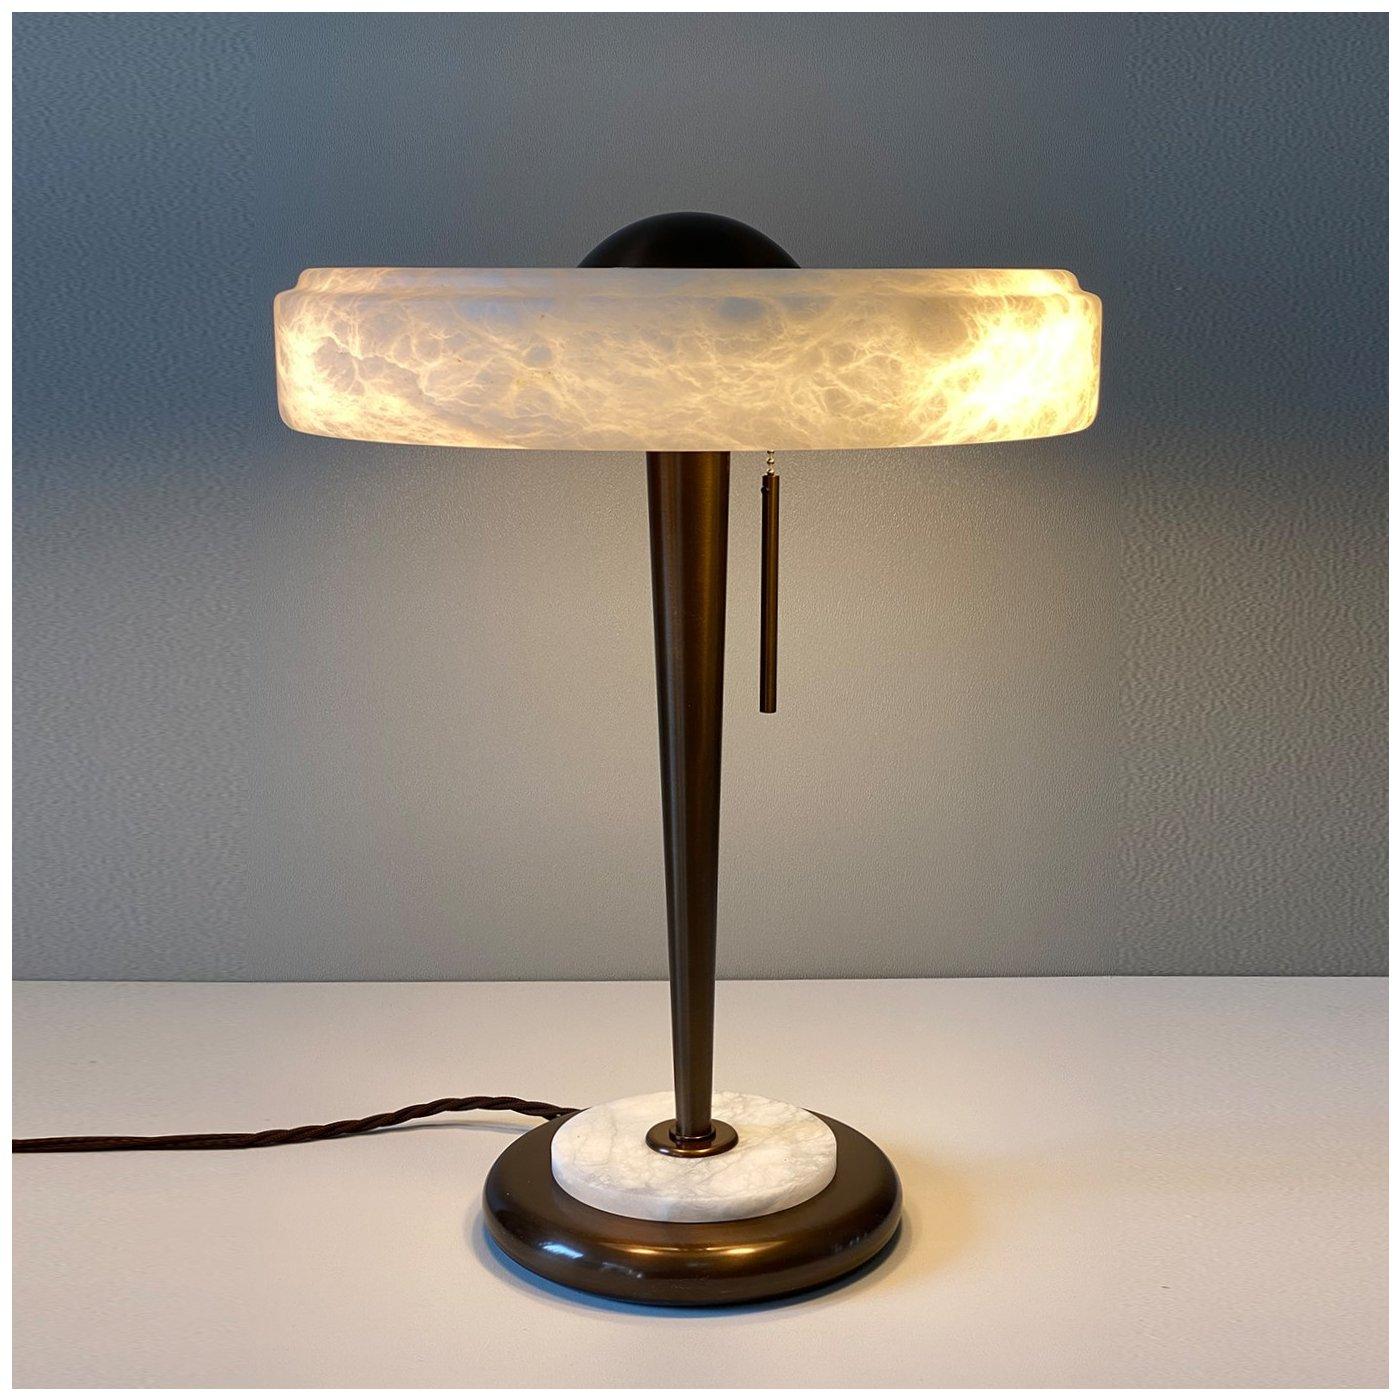 This stunning table lamp comes in a limited edition collection of 10 pieces. With its refined Art Deco flair, this elegant collector's item features an exquisitely handcrafted bronze and alabaster circular base, a sleek cone-shaped bronze body